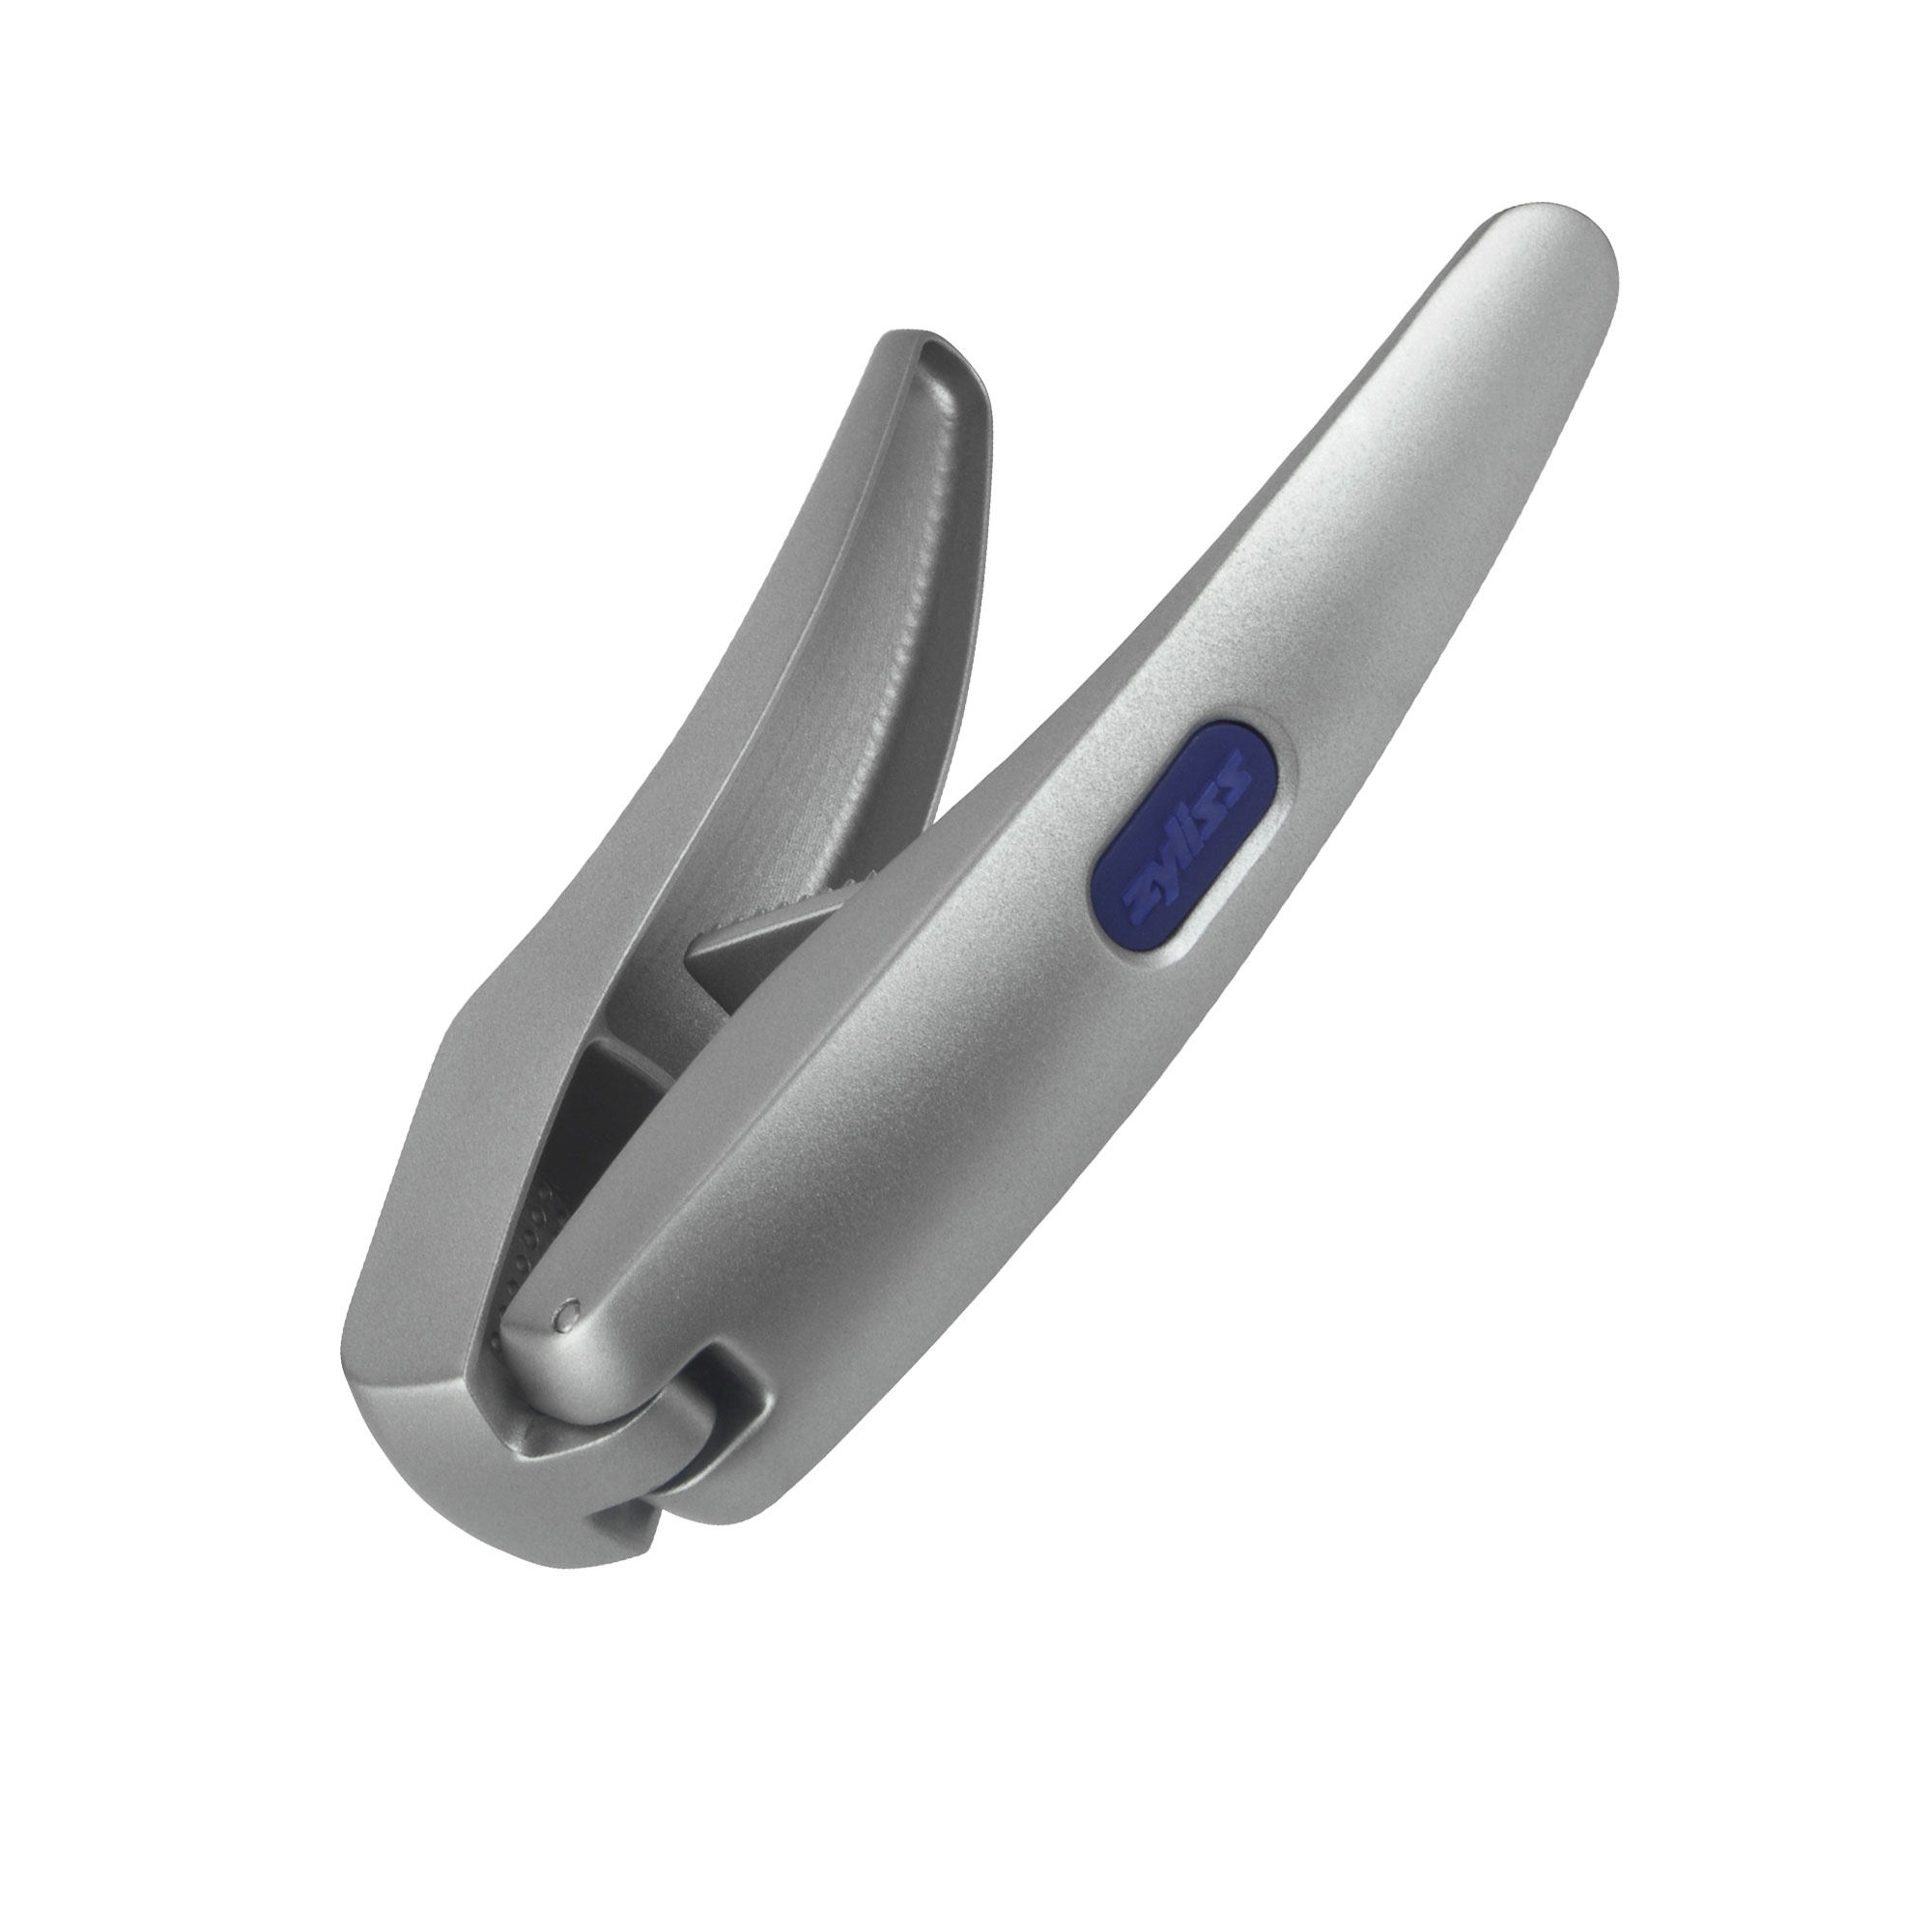 Zyliss Susi 3 Garlic Press with Cleaner Image 1